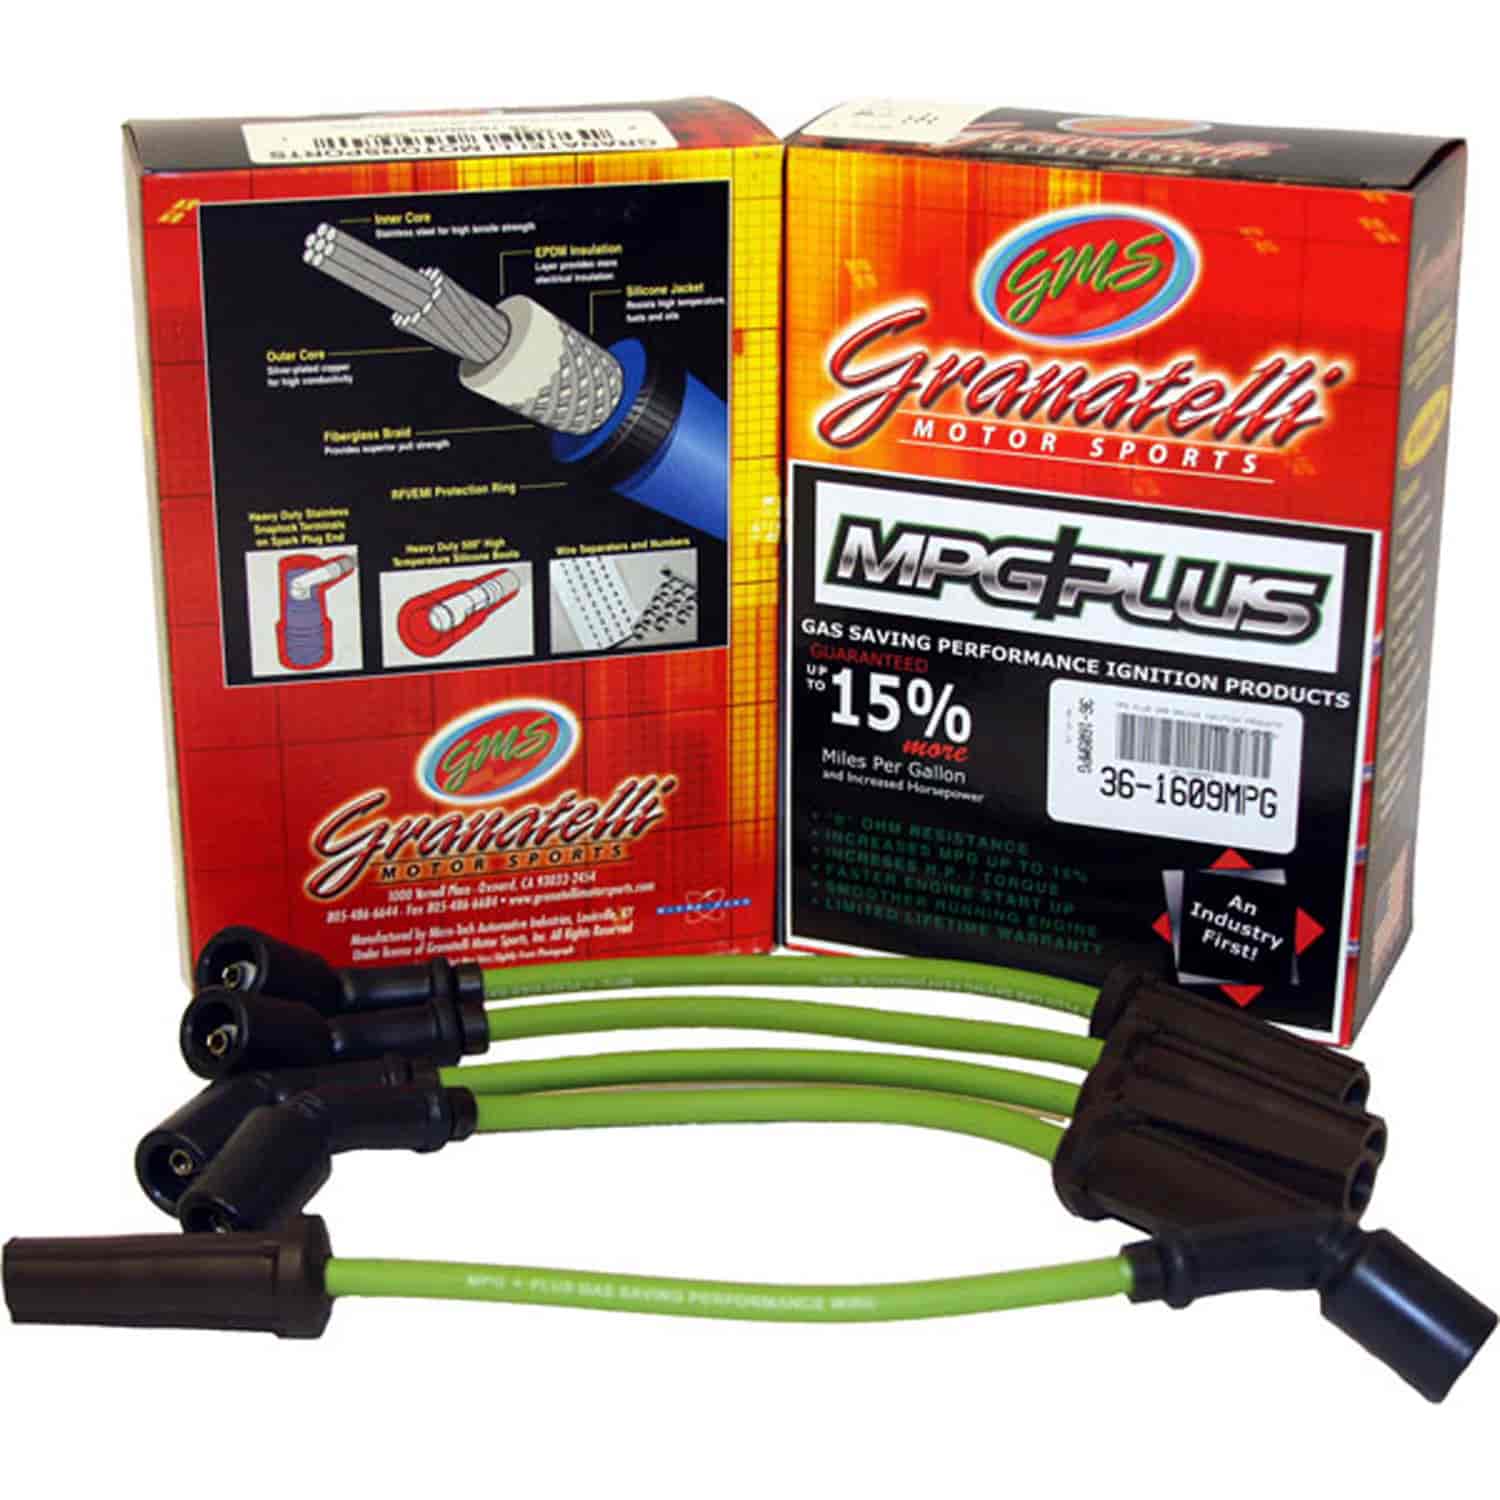 MPG Wires TOYOTA TERCEL 4CYL 1.5L 92-94